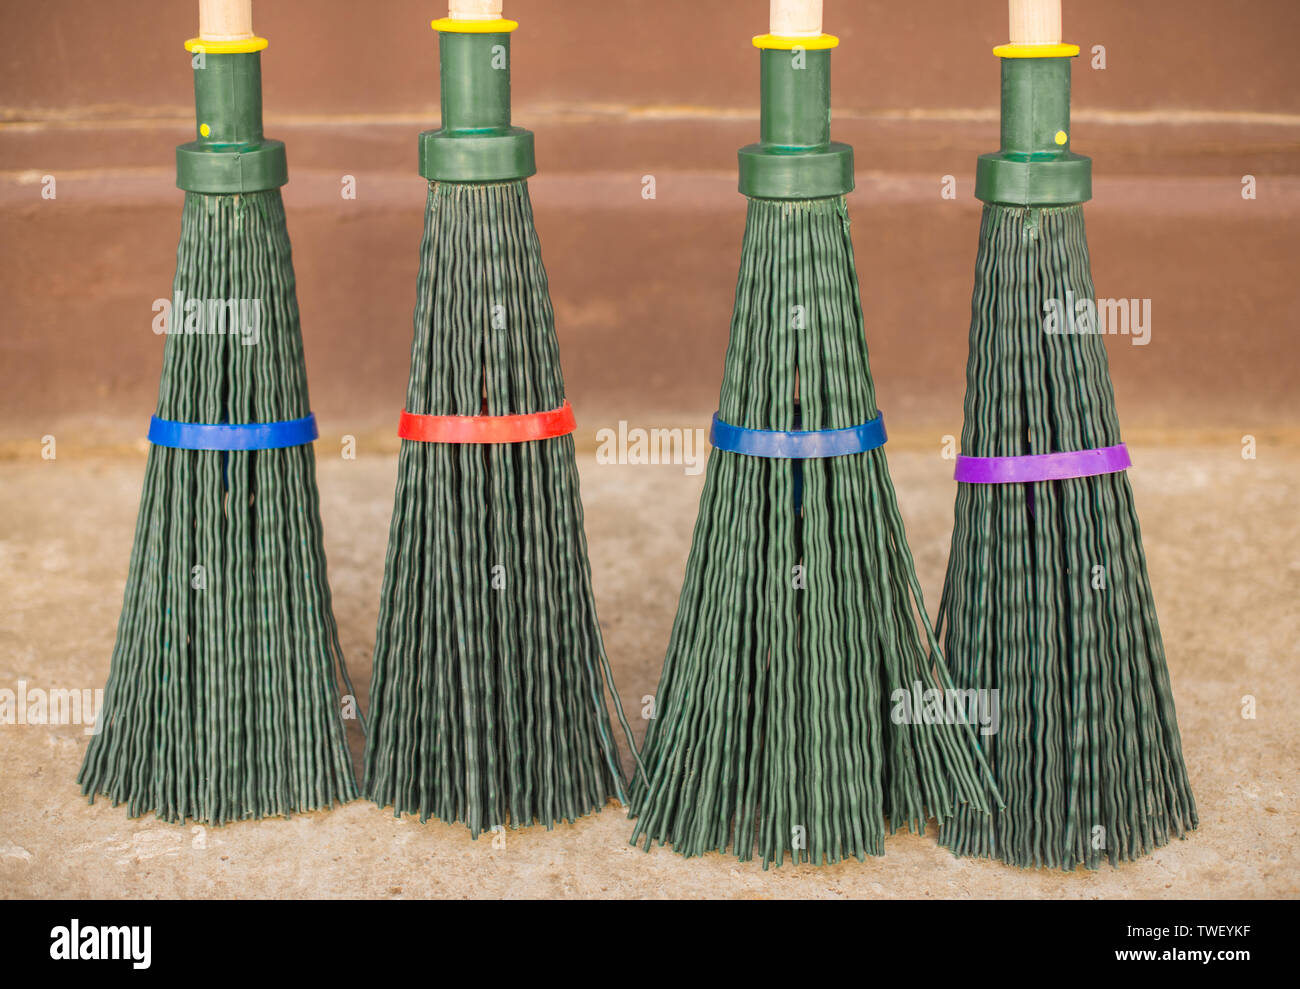 Four plastic garden broom against the wall. Stock Photo